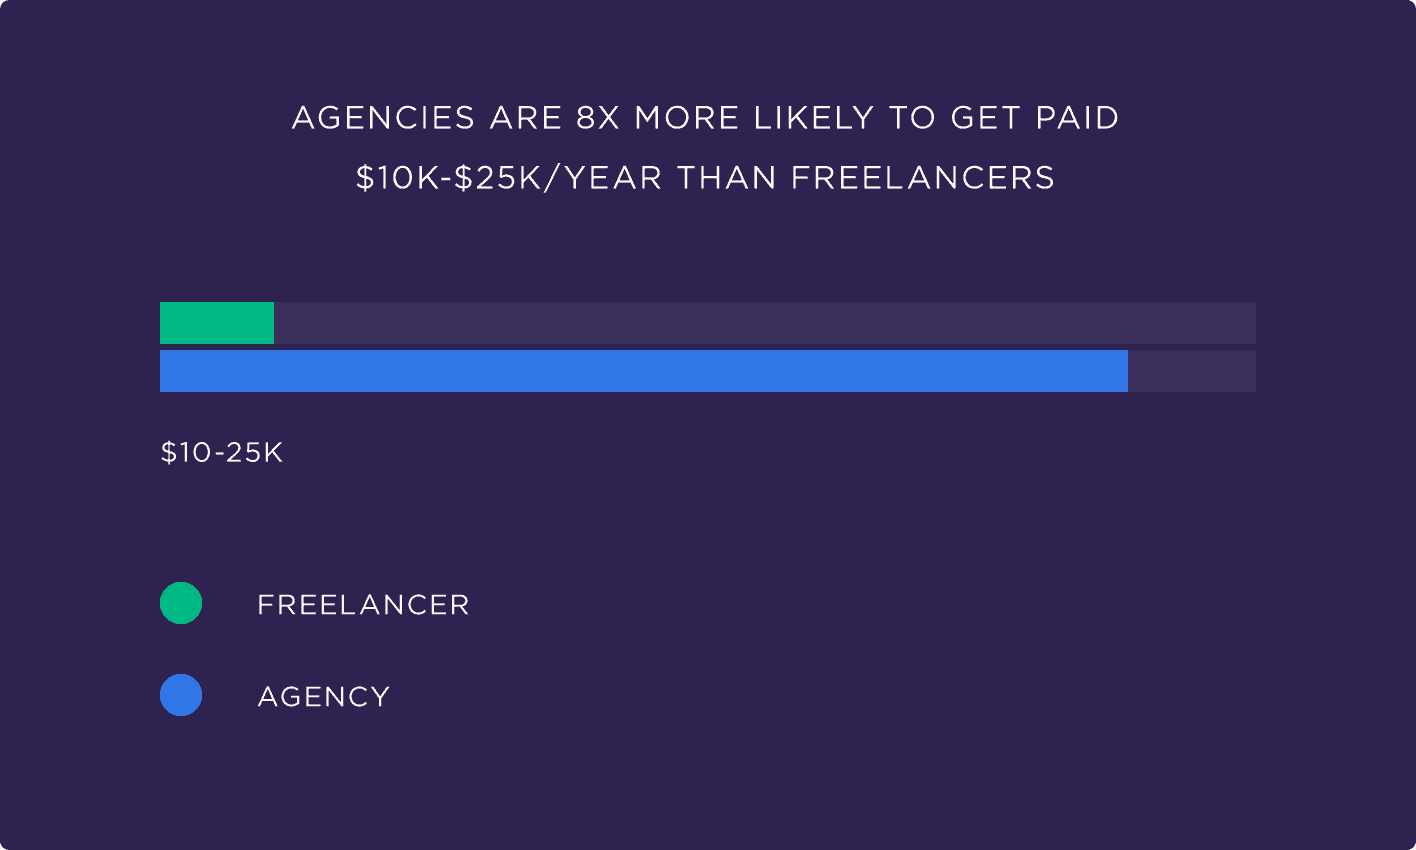 Agencies are 8X more likely to get paid $10k-$25k/year than freelancers